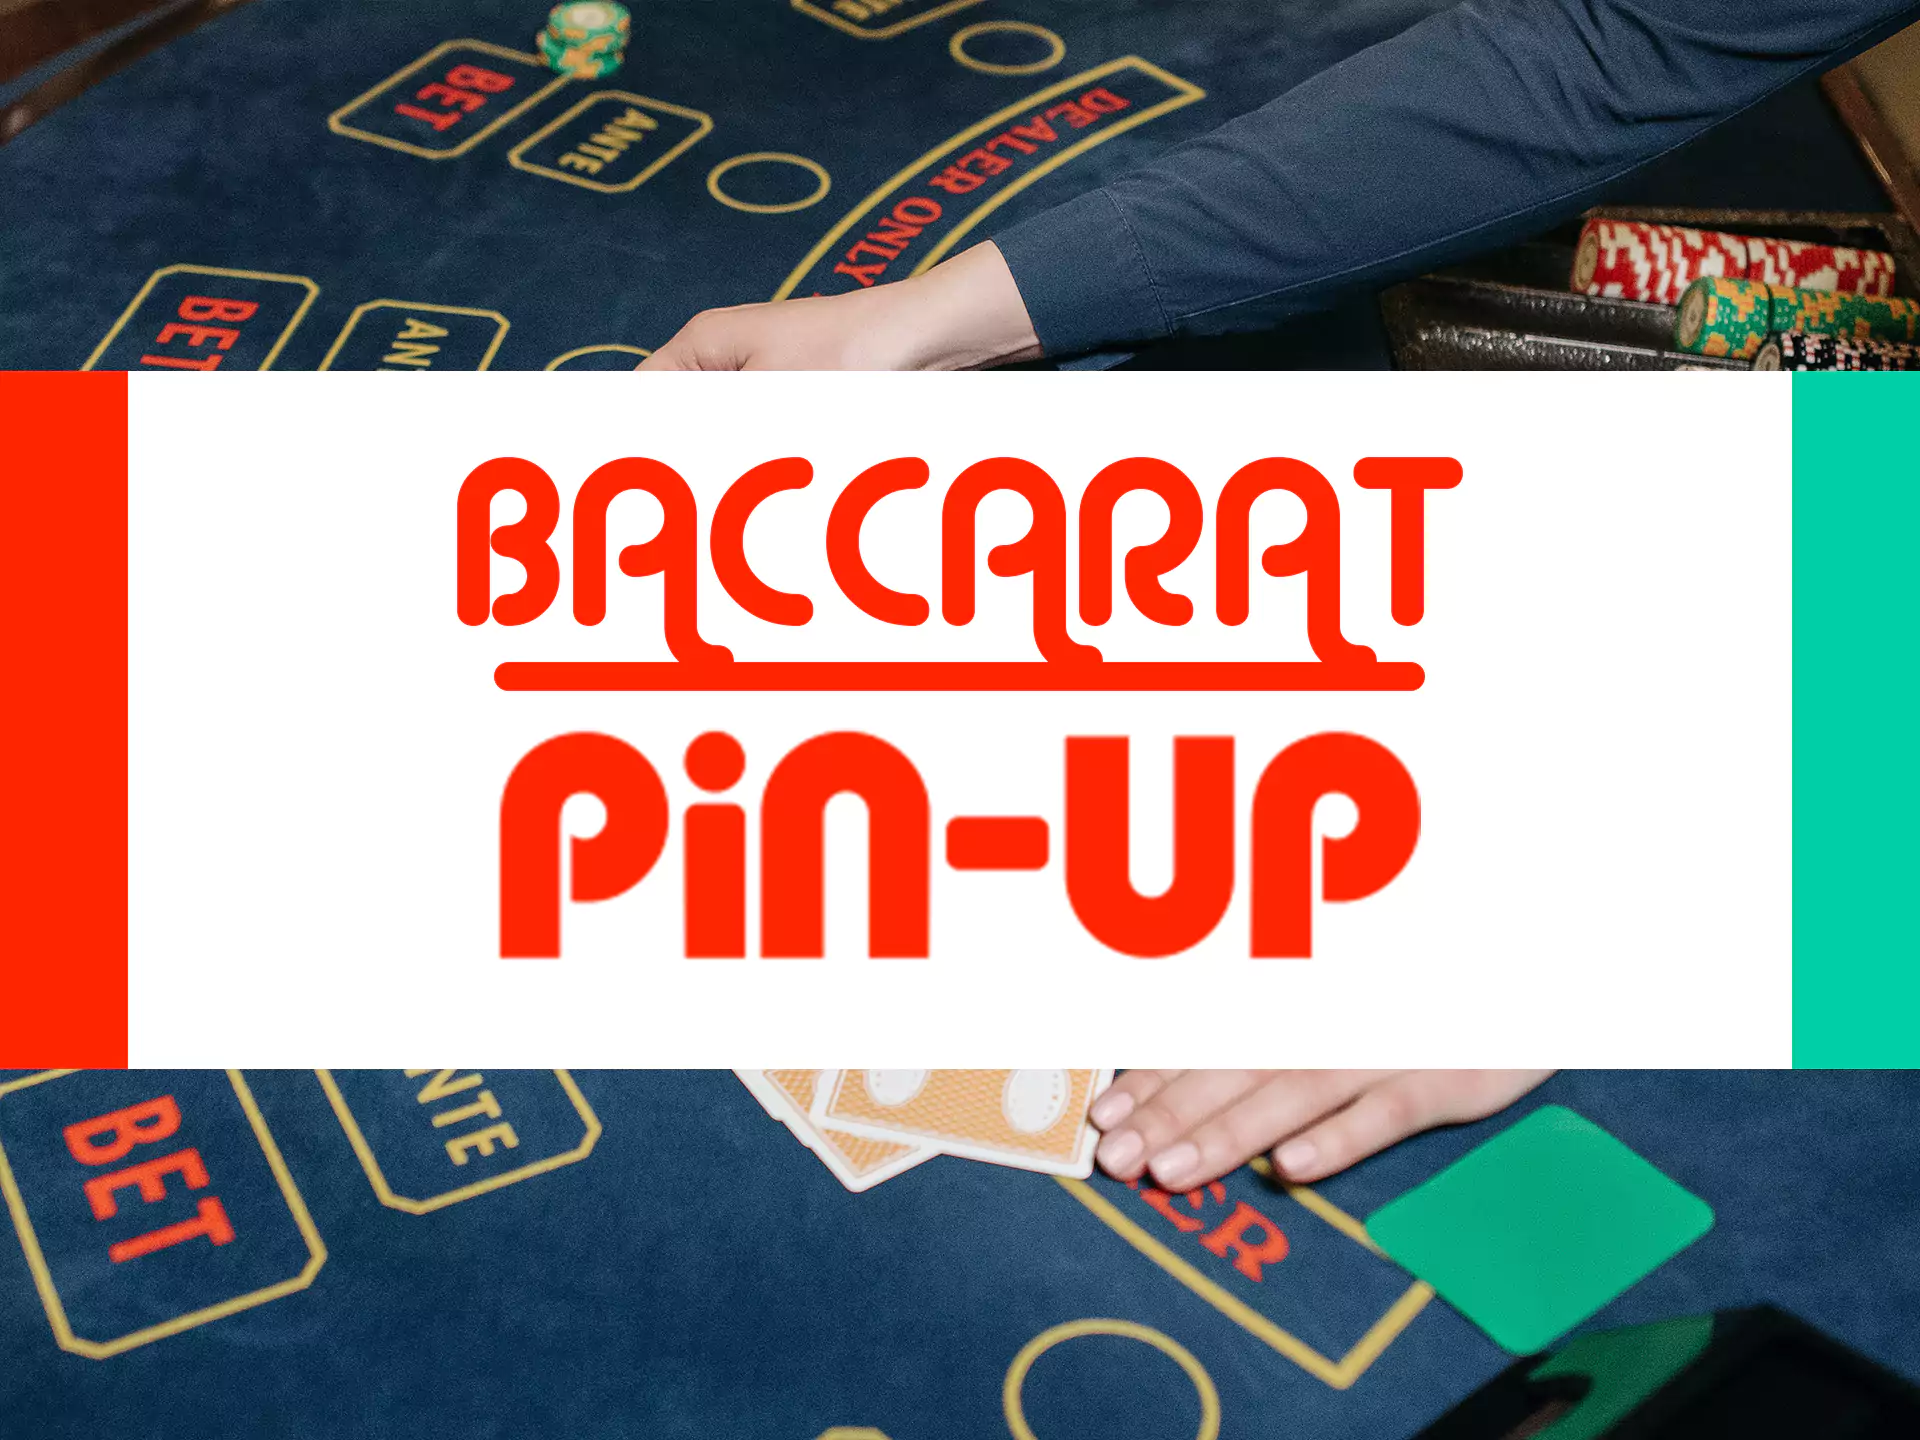 Play baccarat in the Pin-Up casino.